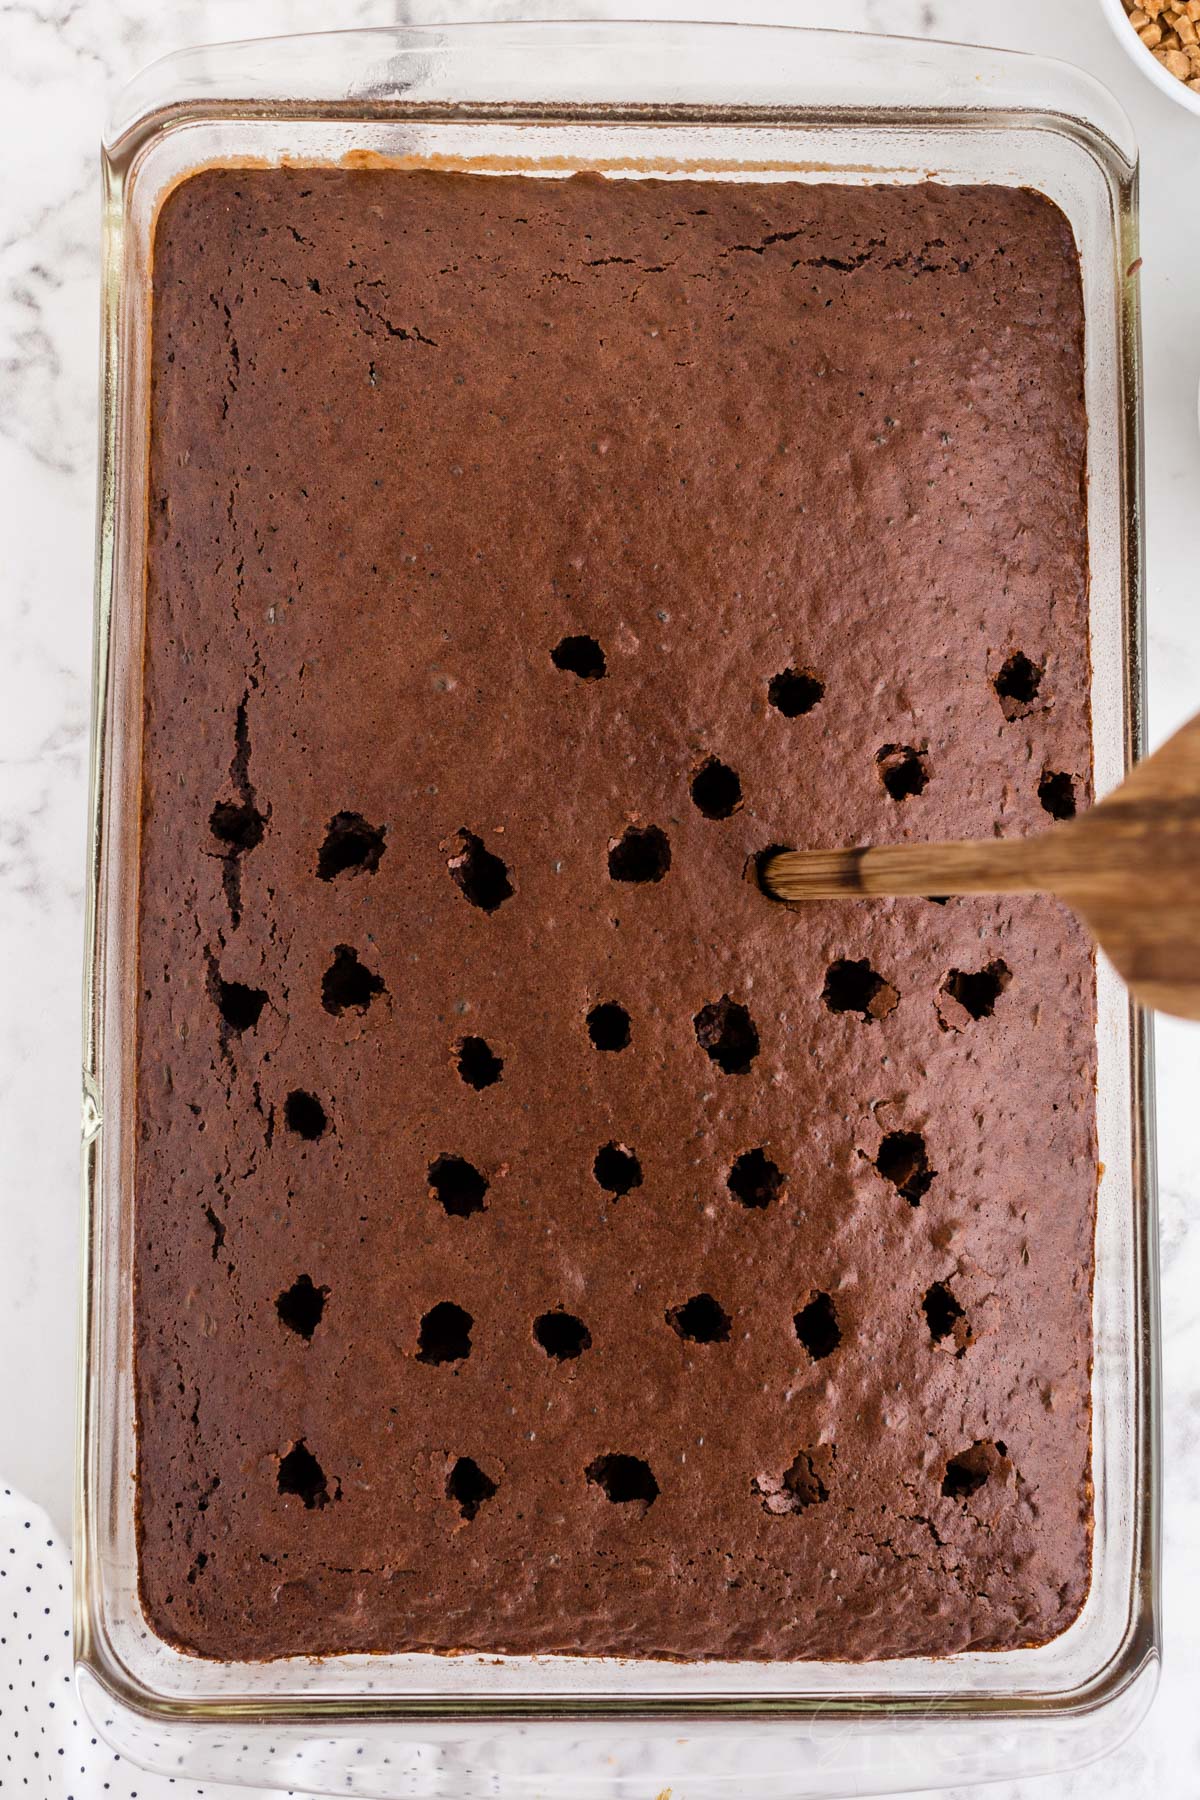 Back of a wooden spoon poking holes in the baked chocolate cake base in a glass baking dish on a countertop.